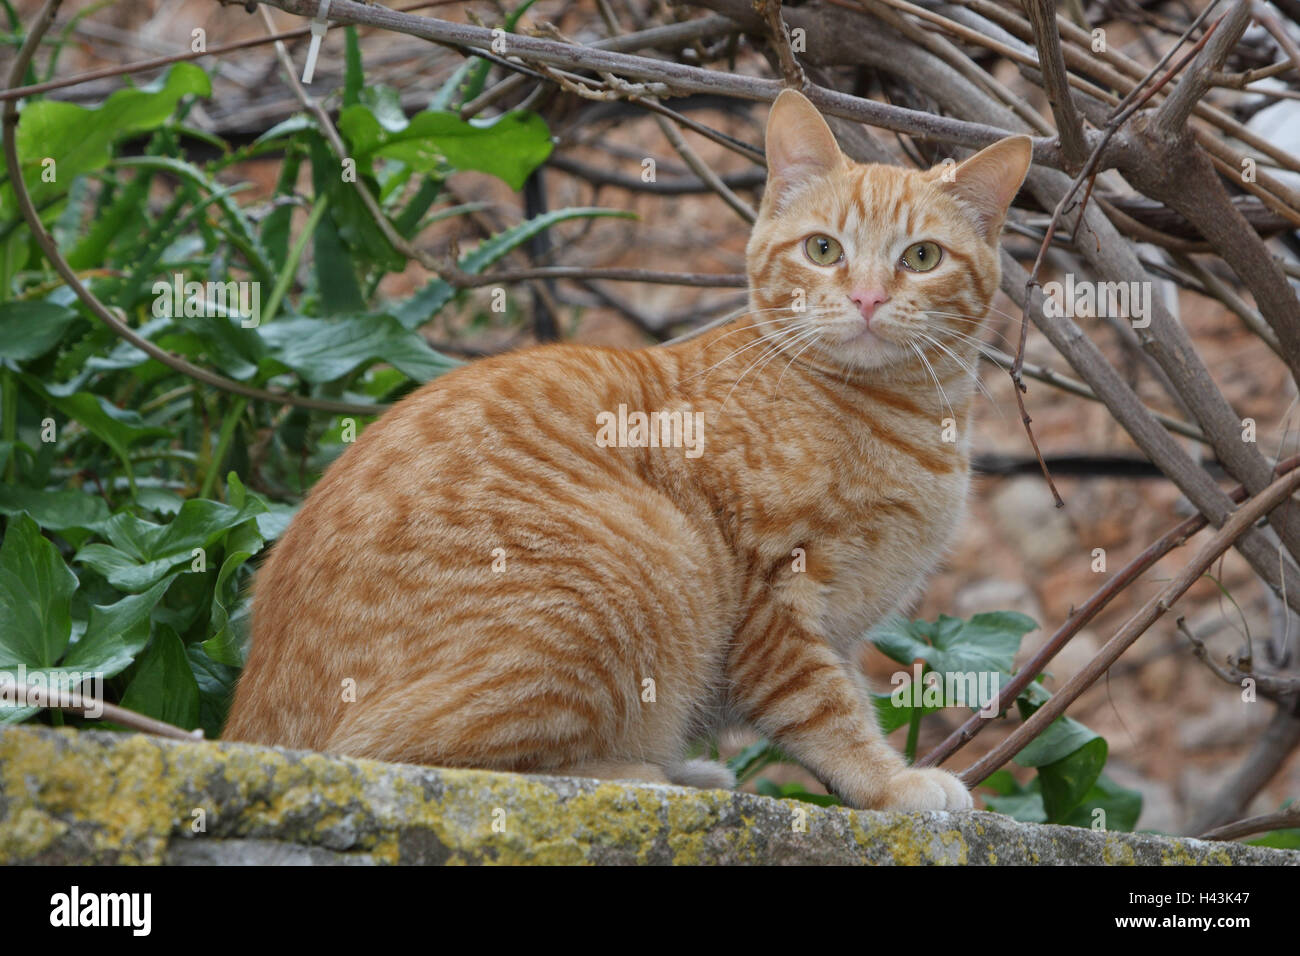 Cat, red, striped, defensive wall, animals, mammals, pets, small cats, Felidae, domesticates, house cat, without Lord, day release prisoners, stray, street cat, individually, only, outside, garden defensive wall, shrub, Spain, Stock Photo